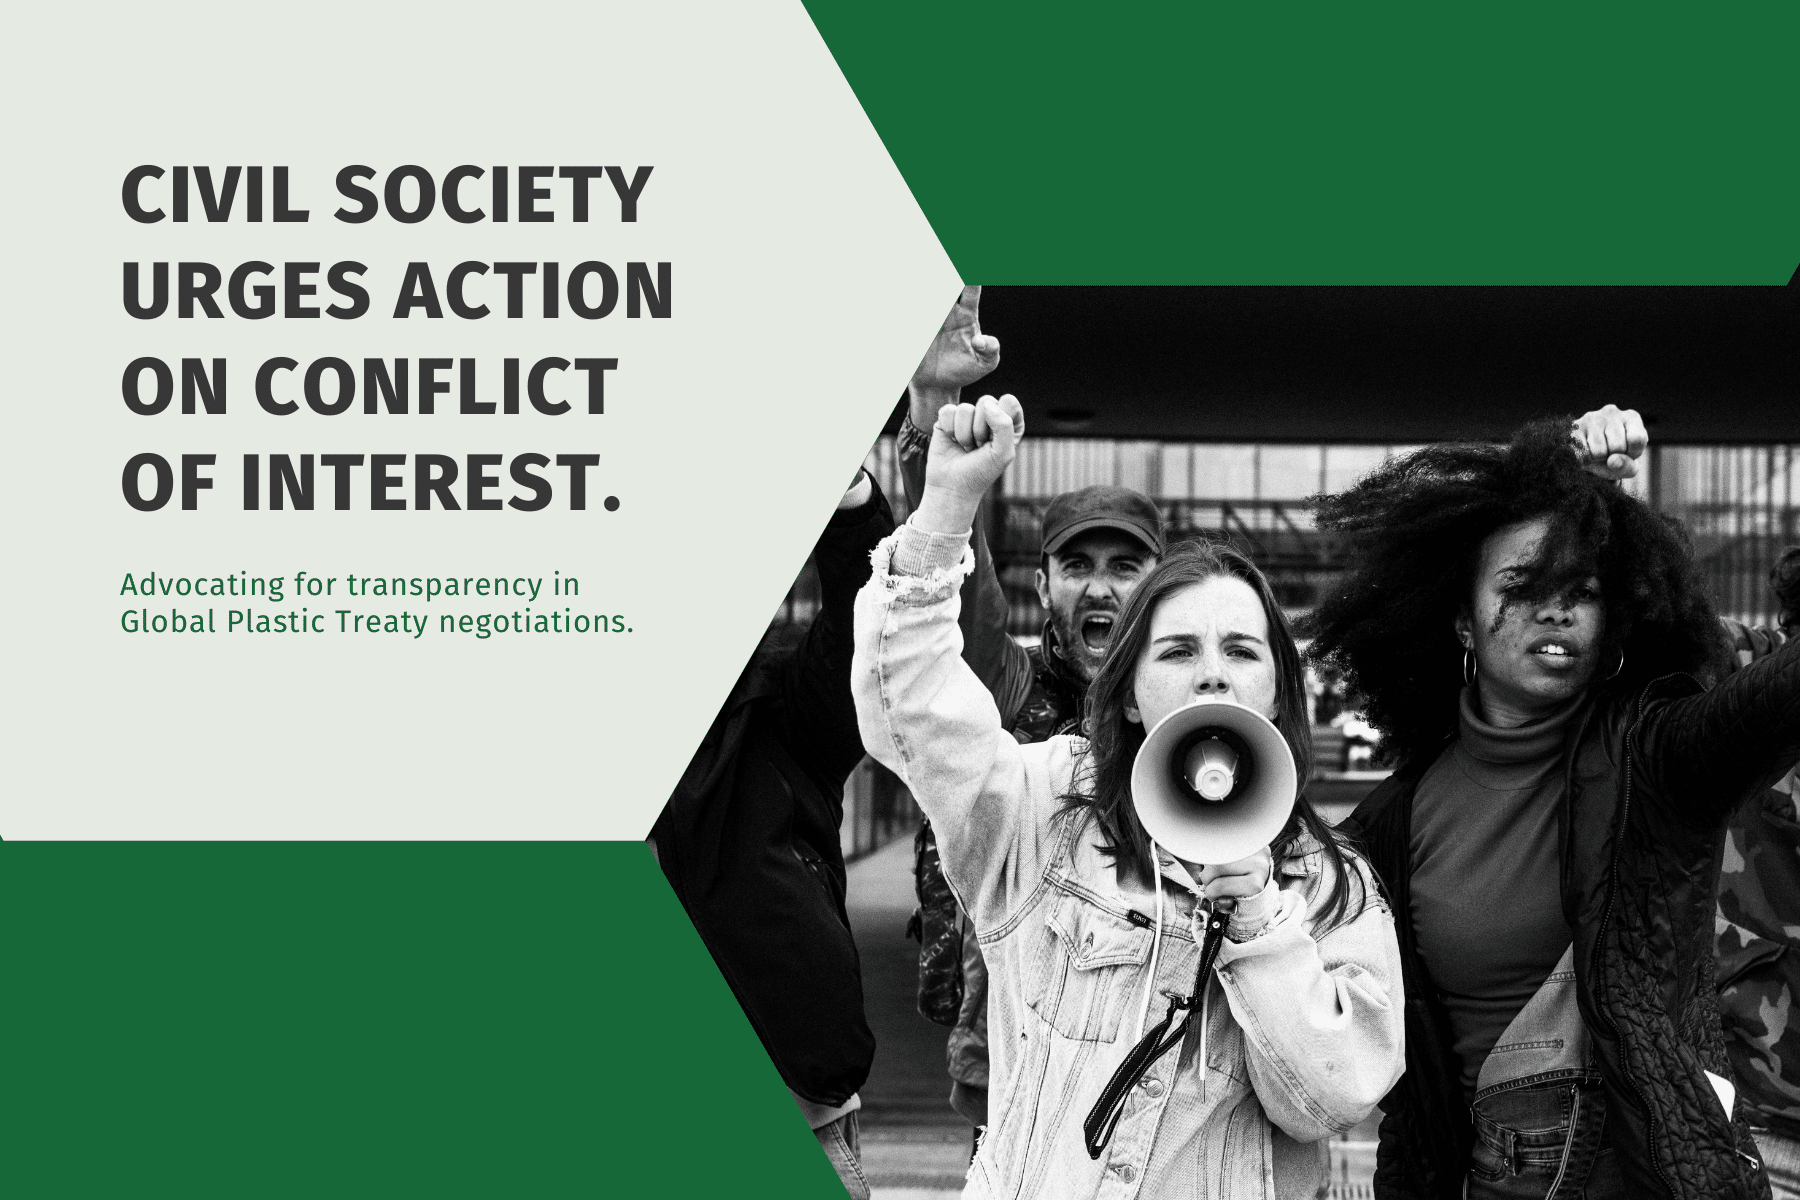 A black and white image of two women in a protest, one speaking through a sound magnifier. Text overlay in green reads: "Civil Society Urges Action on Conflict of Interest. Advocating for transparency in Global Plastic Treaty Negotiations